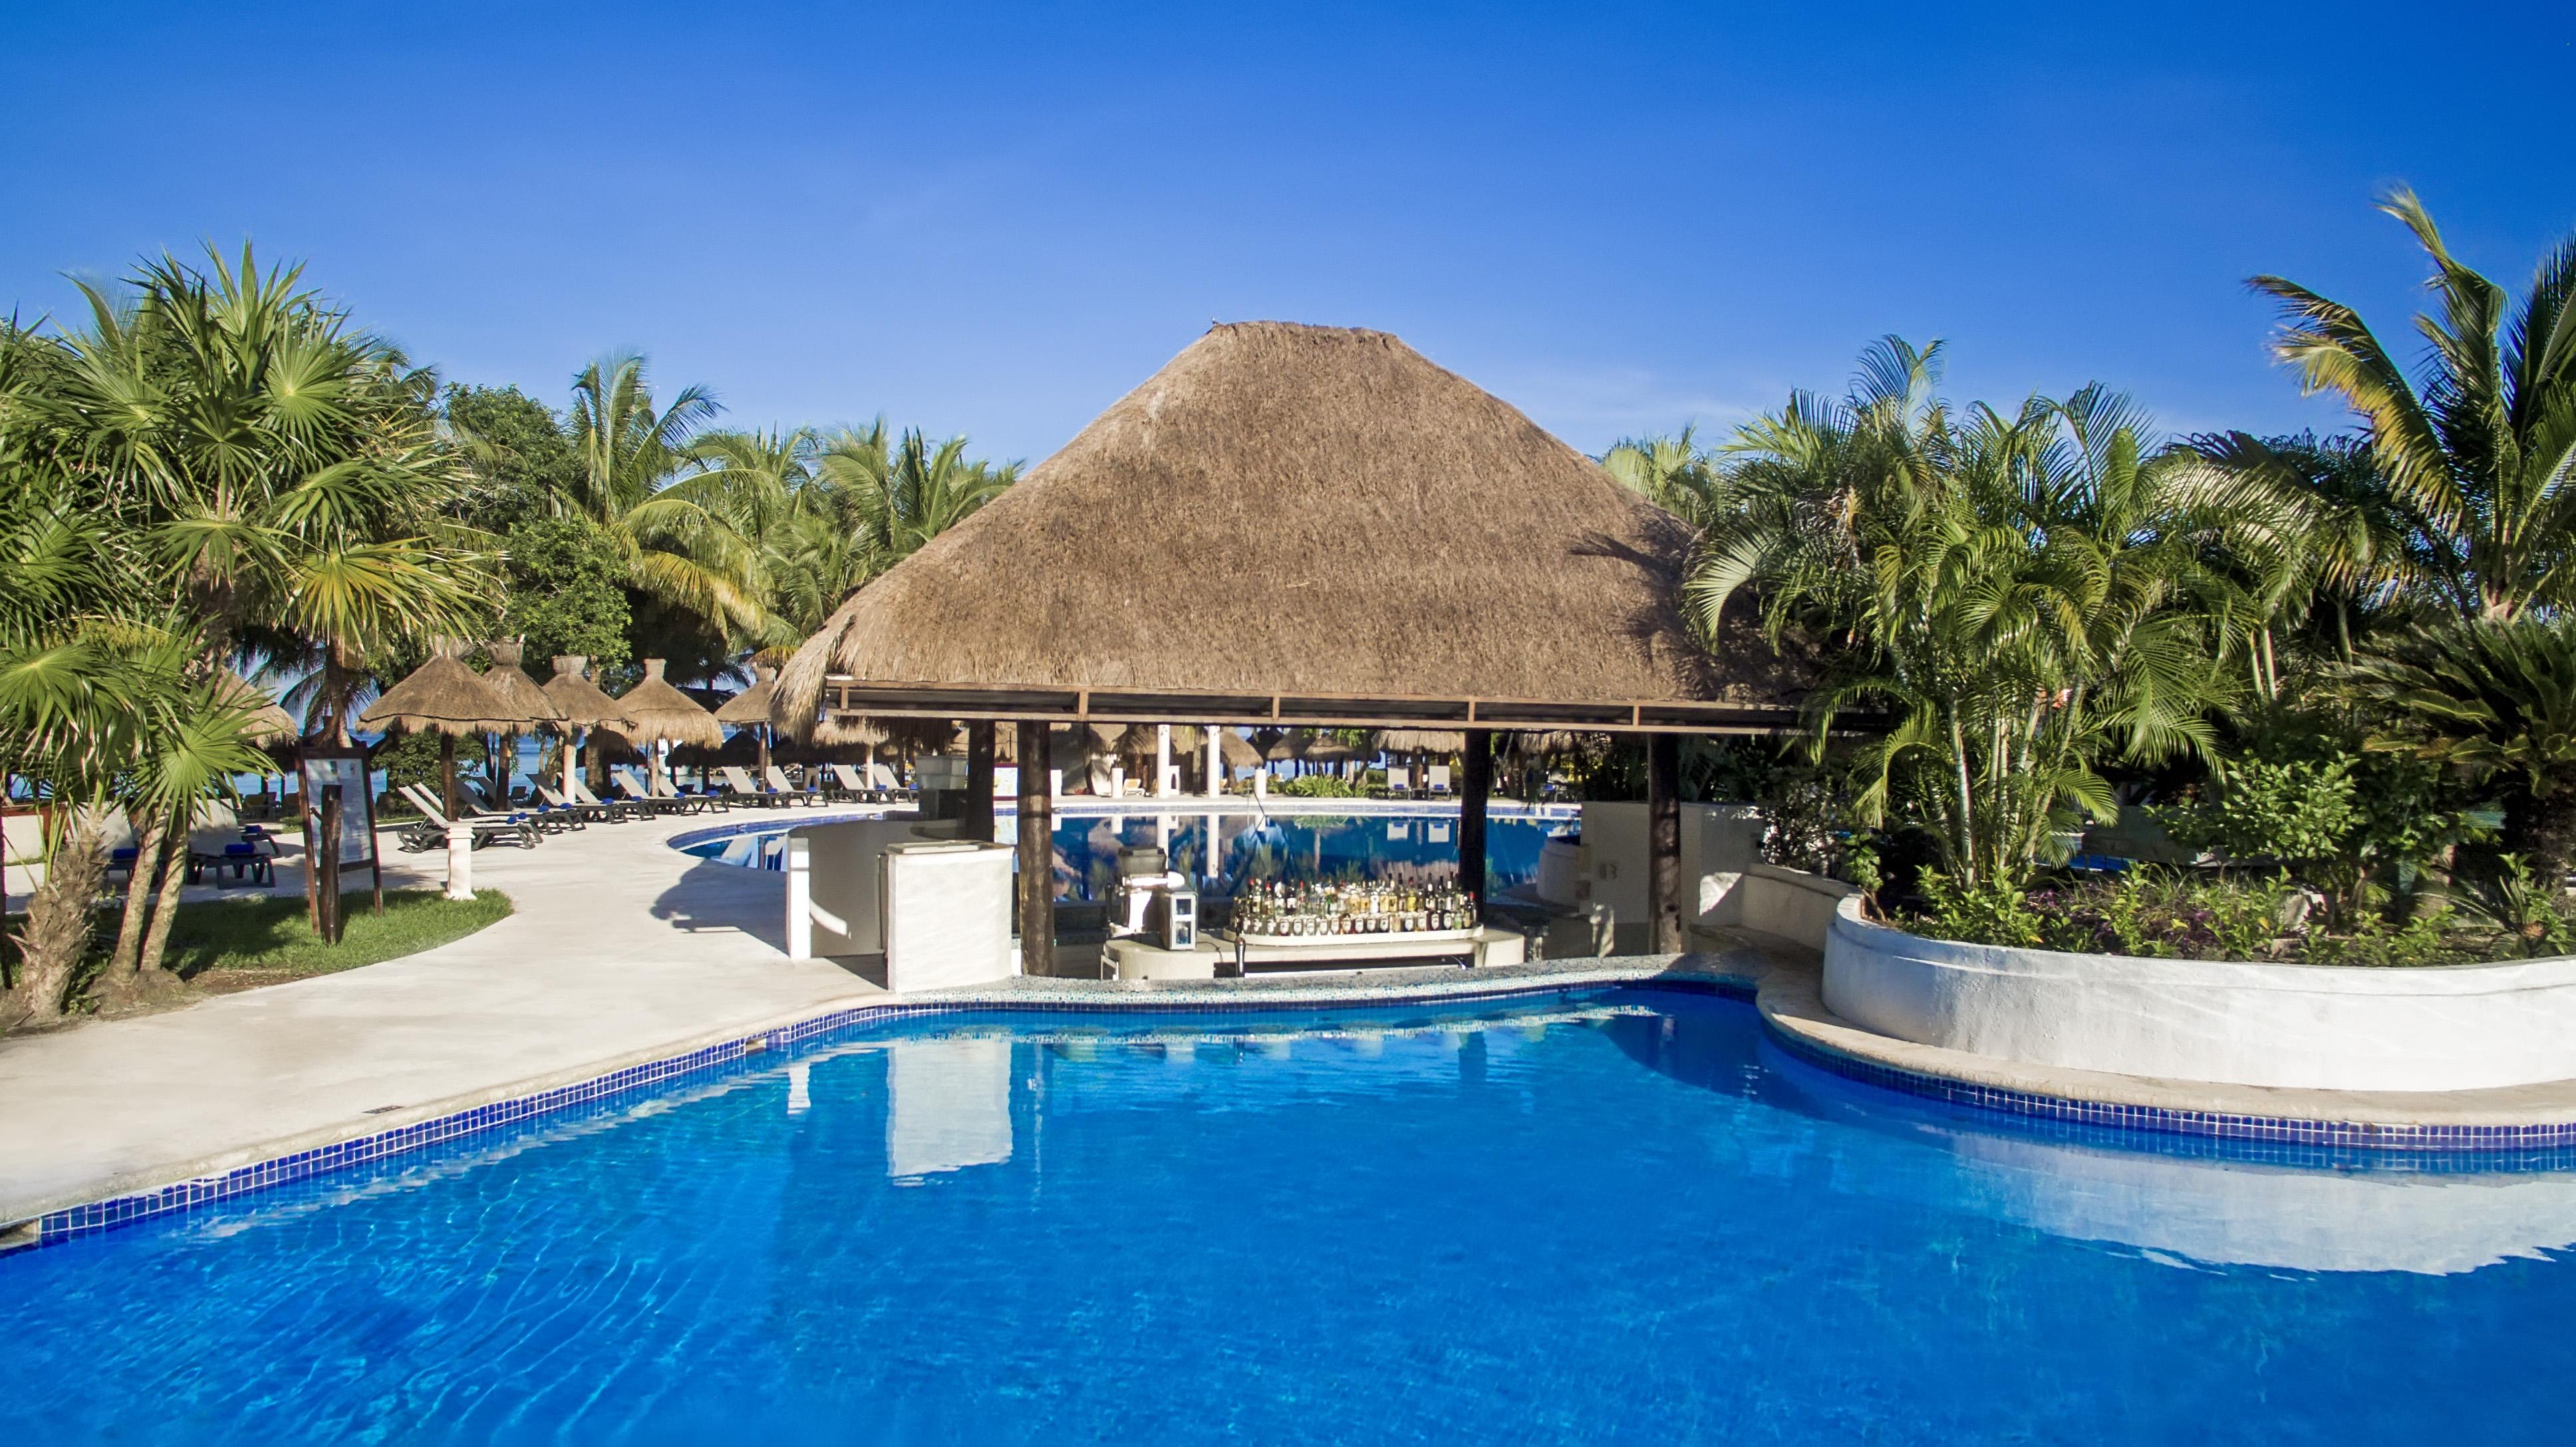 HOTEL IBEROSTAR COZUMEL 5* (Mexico) - from C$ 277 | iBOOKED